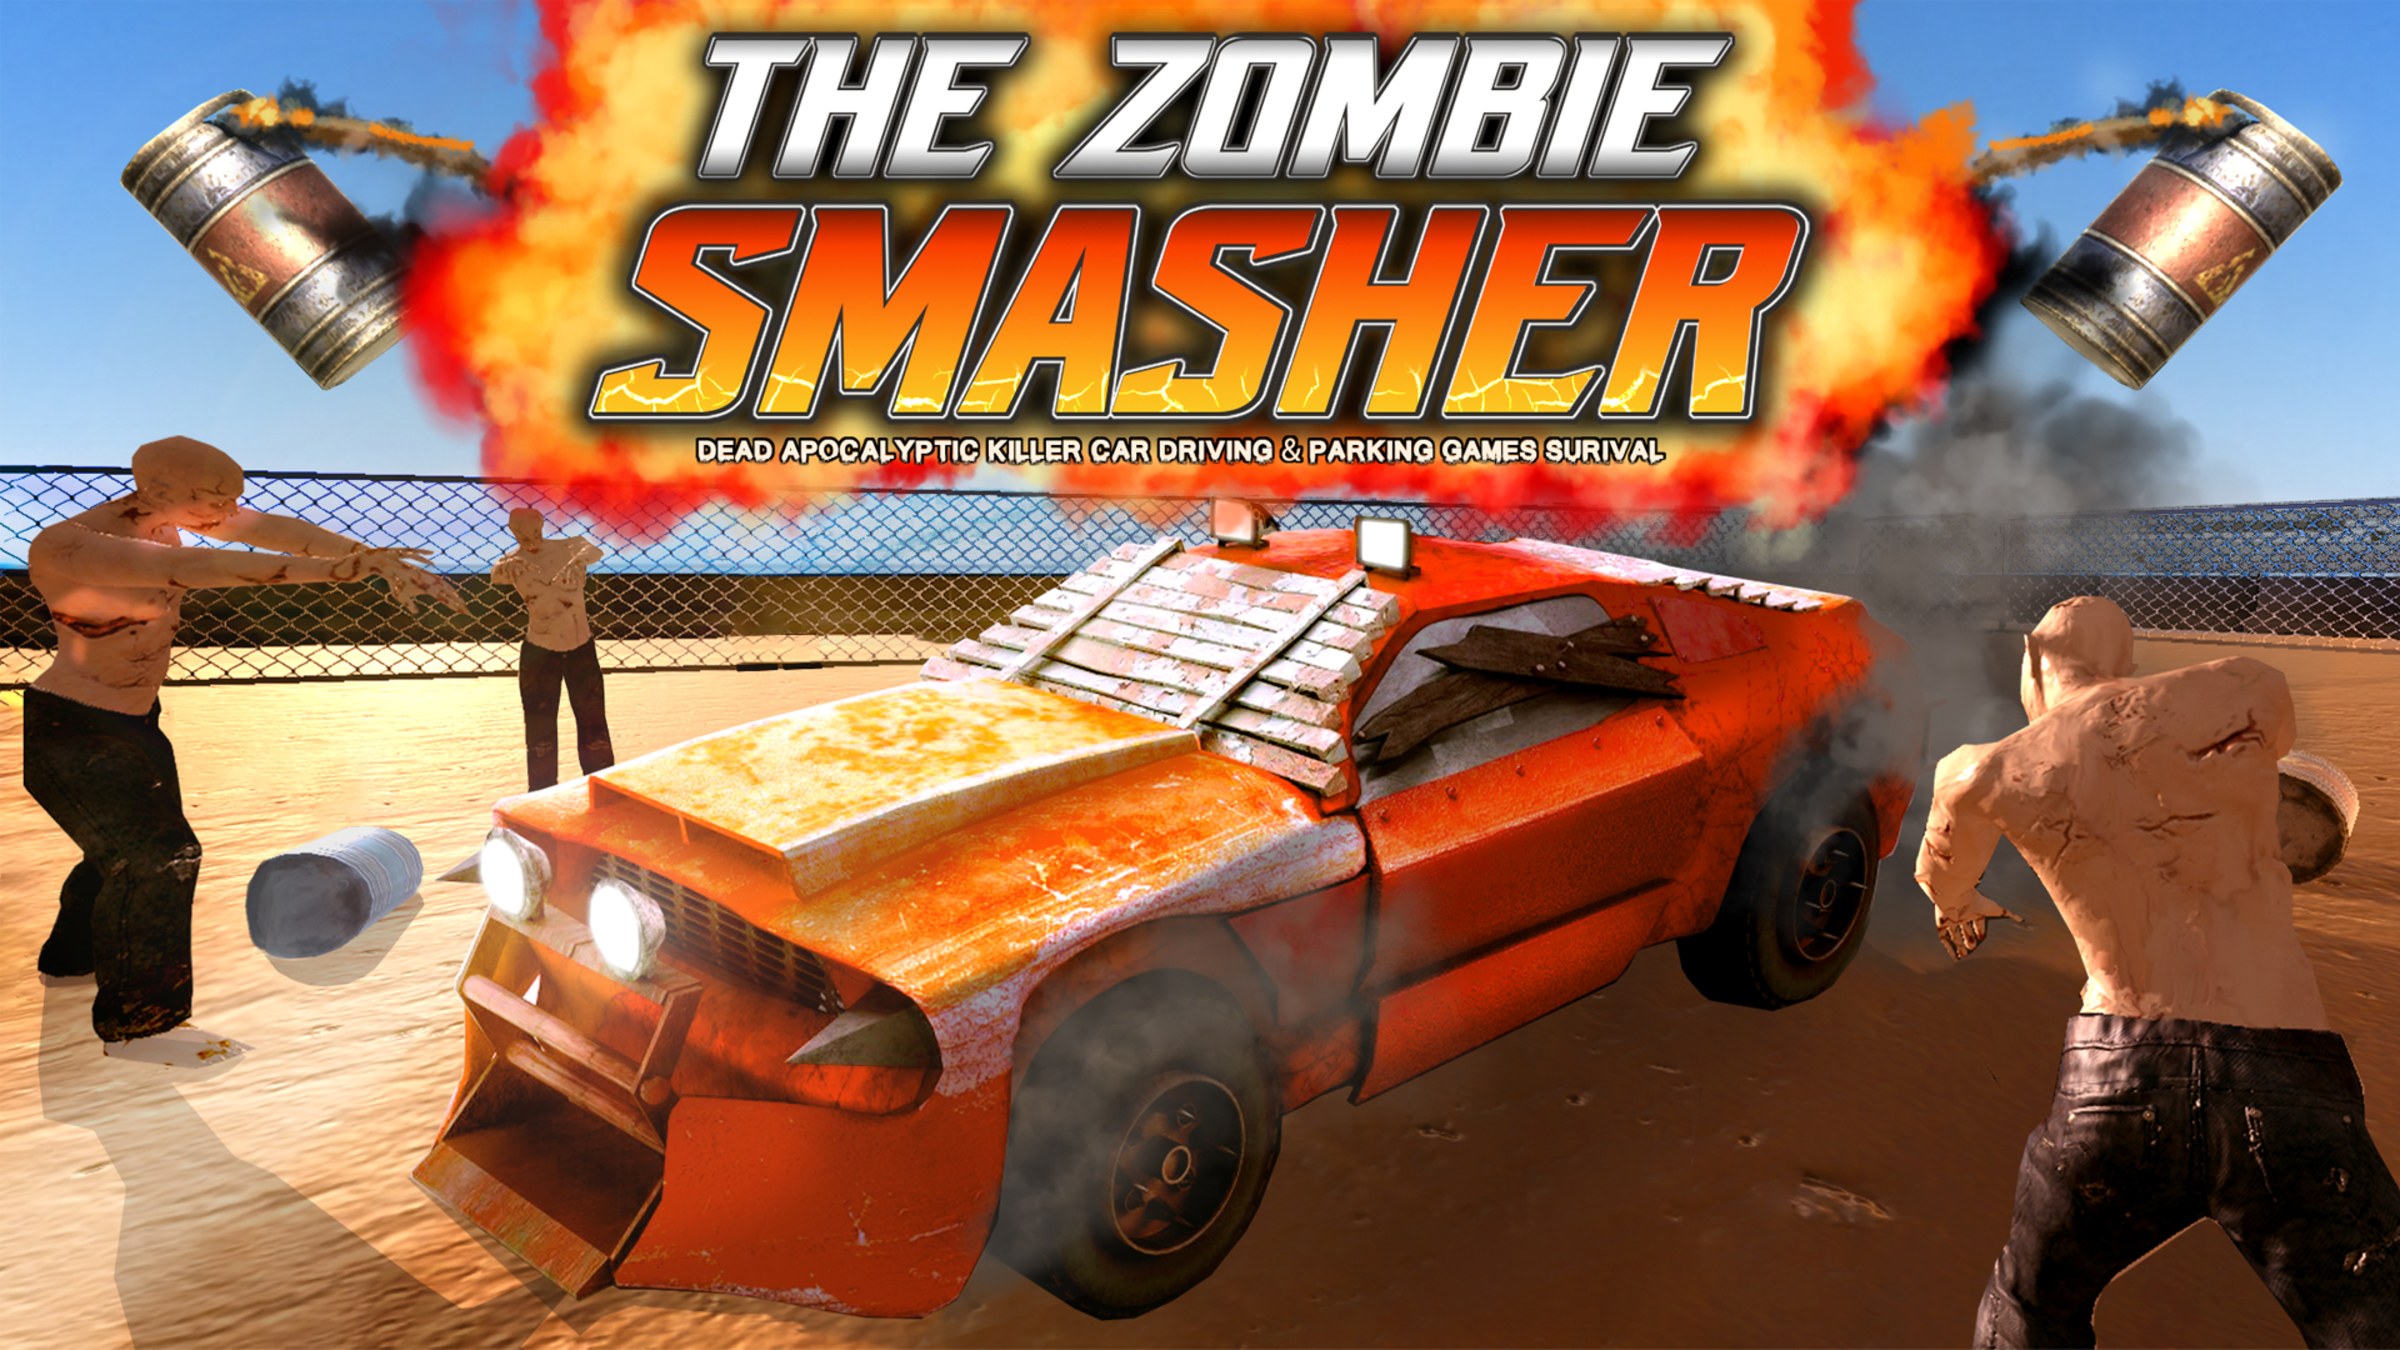 https://assets.nintendo.com/image/upload/c_fill,w_1200/q_auto:best/f_auto/dpr_2.0/ncom/en_US/games/switch/t/the-zombie-smasher-dead-apocalyptic-killer-car-driving-and-parking-games-survival-switch/